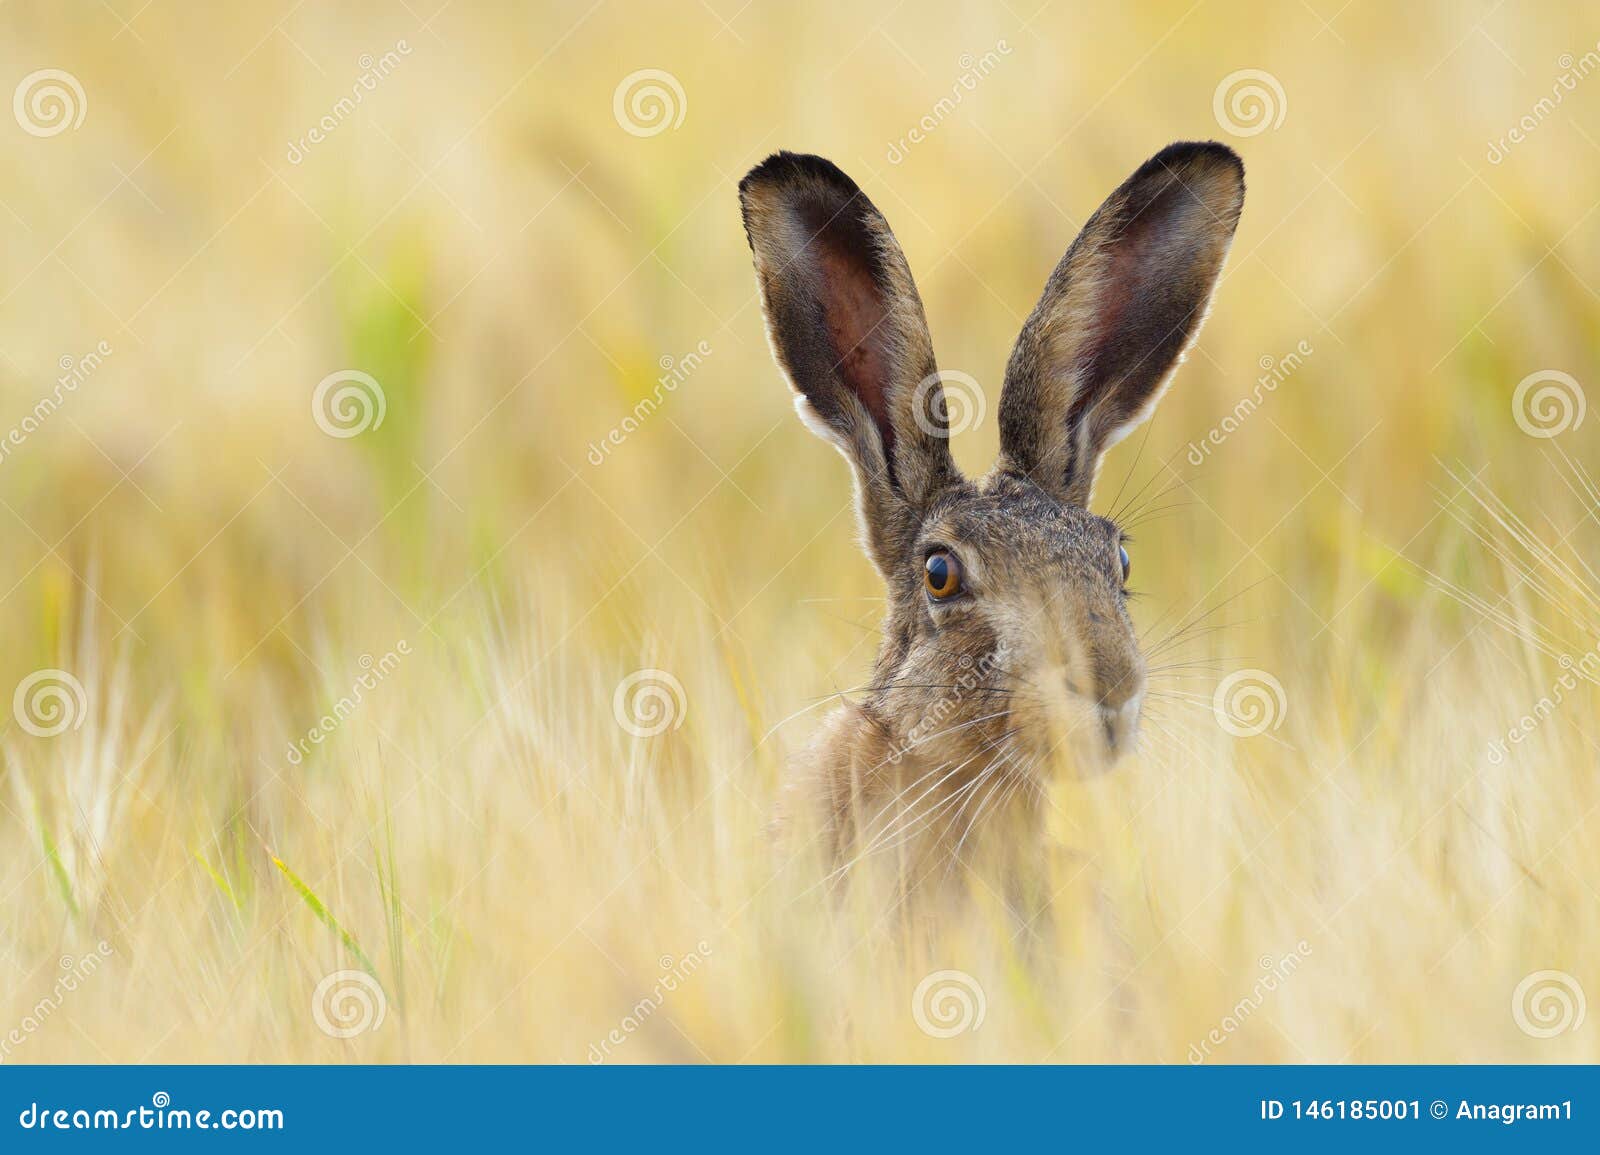 european brown hare on agricultural field in summer